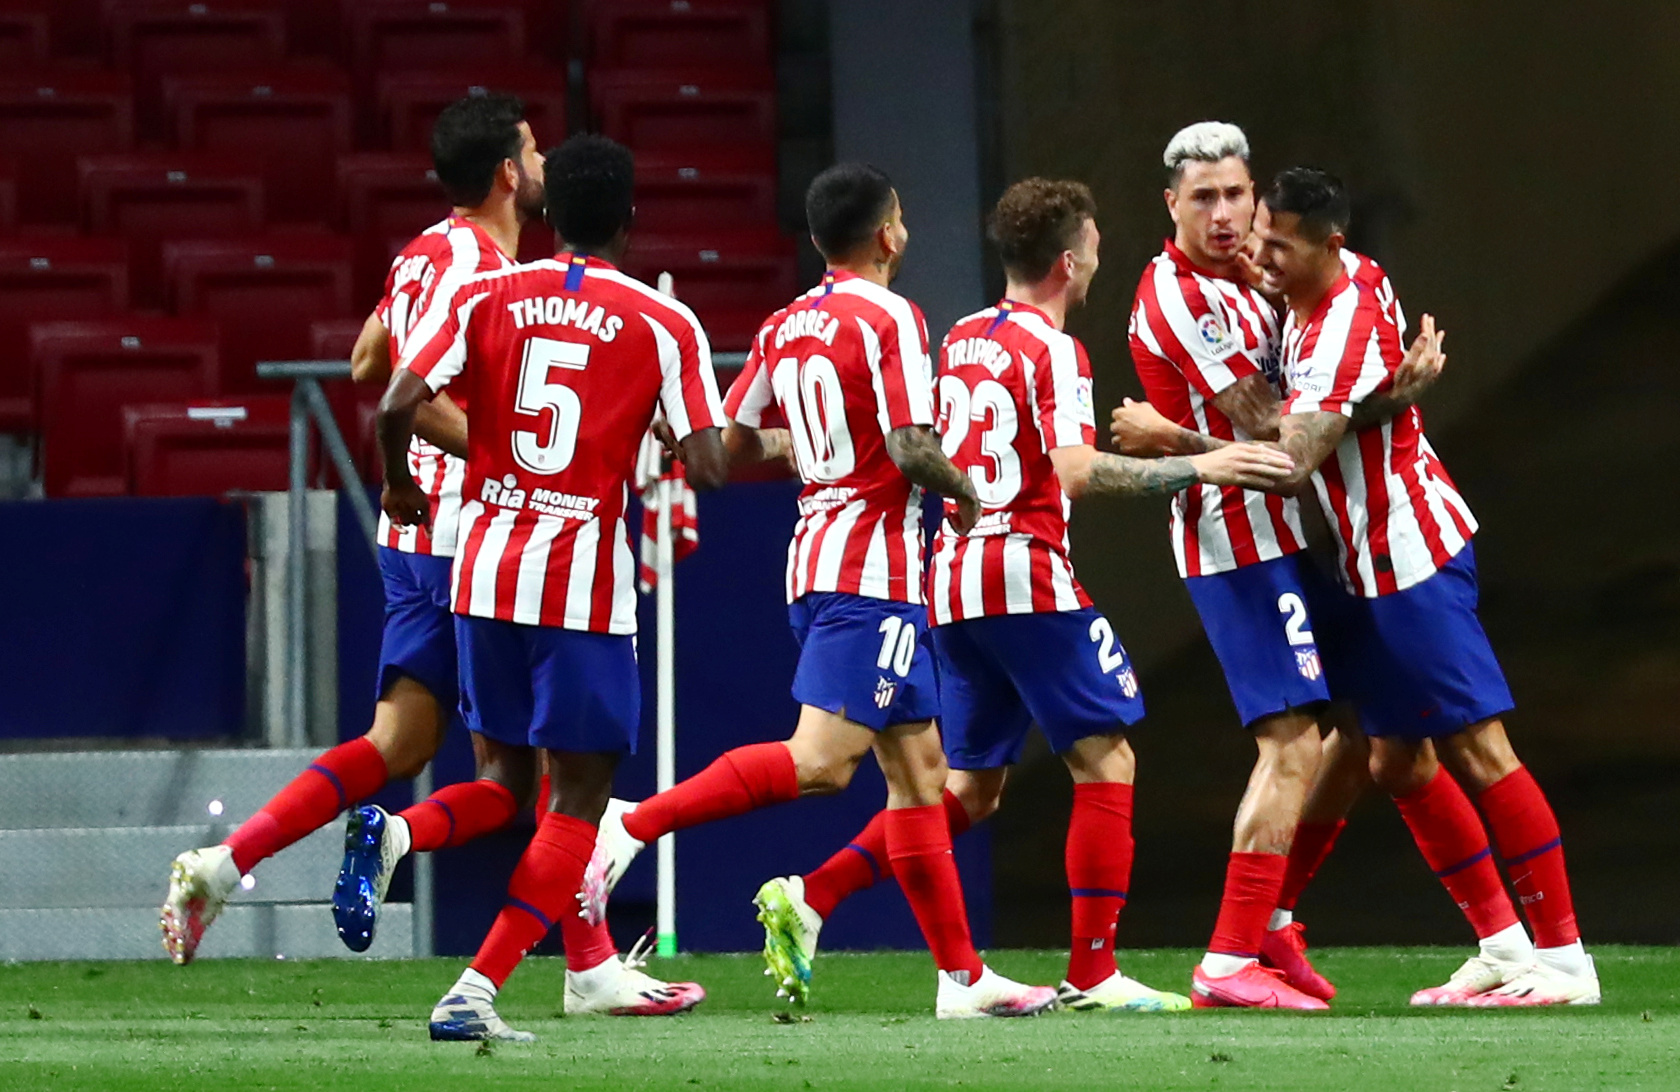 Atletico Madrid's Vitolo celebrates scoring their first goal with teammates, as play resumes behind closed doors following the outbreak of the coronavirus disease (COVID-19) during the La Liga Santander match between Atletico Madrid and Real Valladolid, at Wanda Metropolitano, in Madrid, Spain, on June 20, 2020. Photo: Reuters